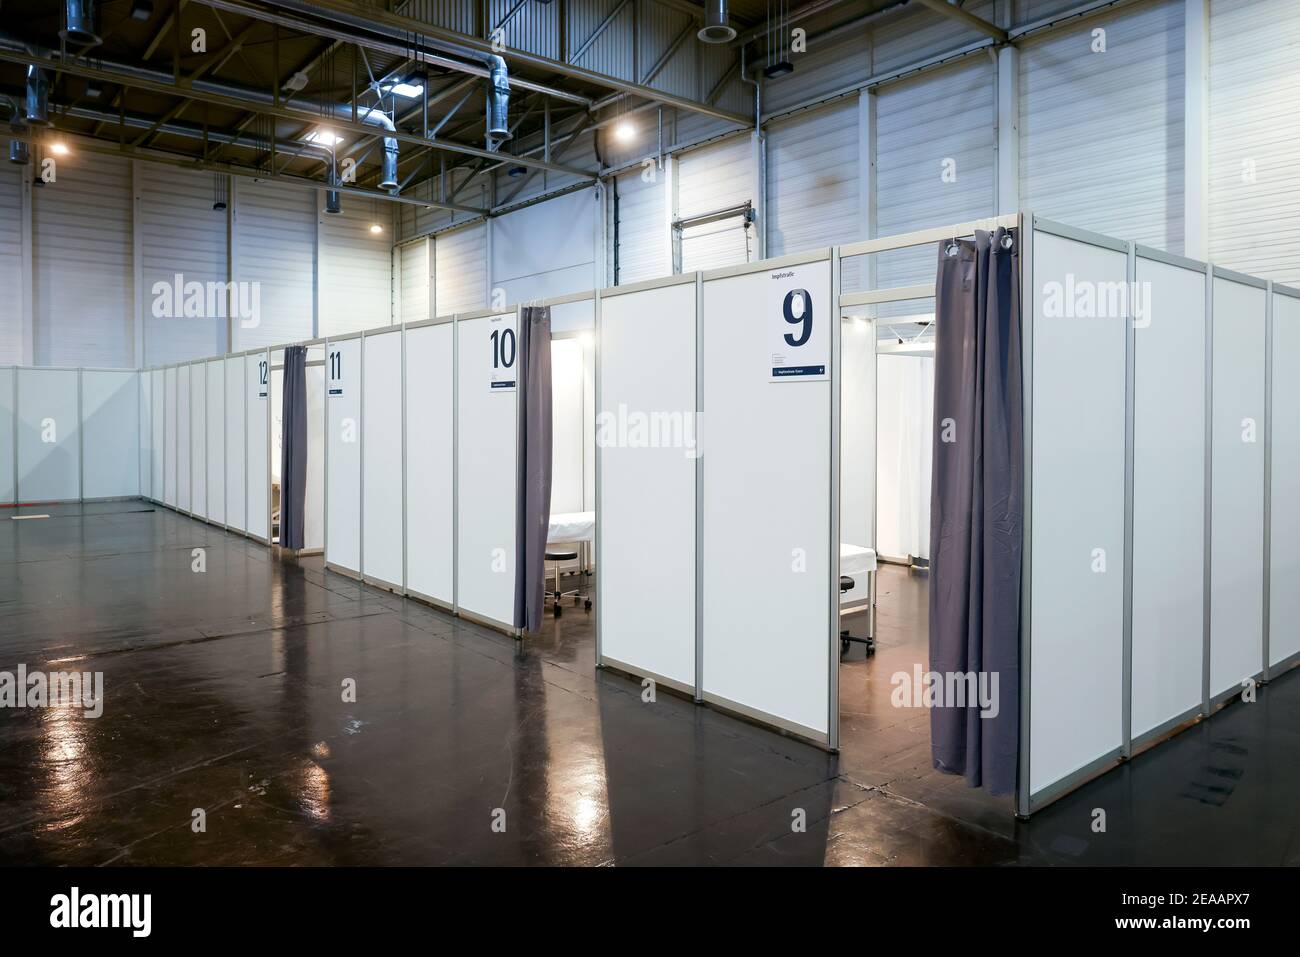 Essen, Ruhr area, North Rhine-Westphalia, Germany - Corona vaccination center Essen in the halls of Messe Essen, in the vaccination booths of the vaccination routes, more than 2, 000 people are to be vaccinated per day. Stock Photo